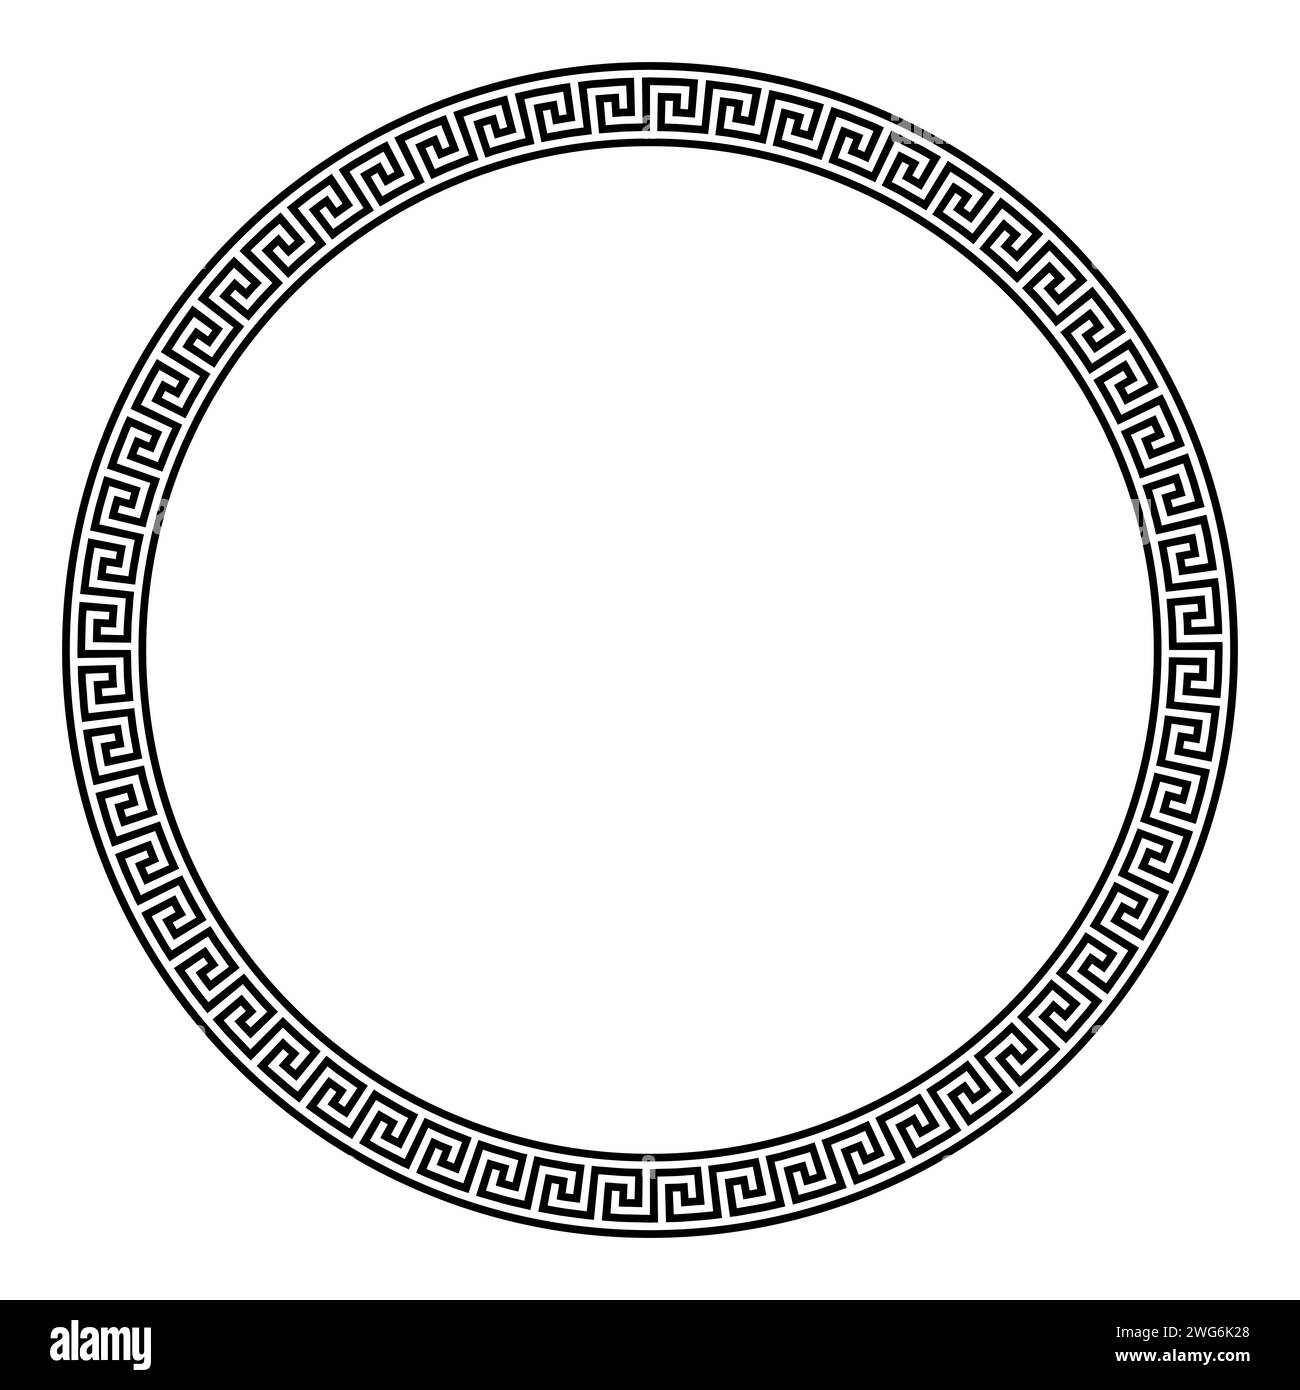 Large meander circle frame, with seamless Greek key pattern. Decorative border with Greek fret motif, constructed from continuous lines. Stock Photo